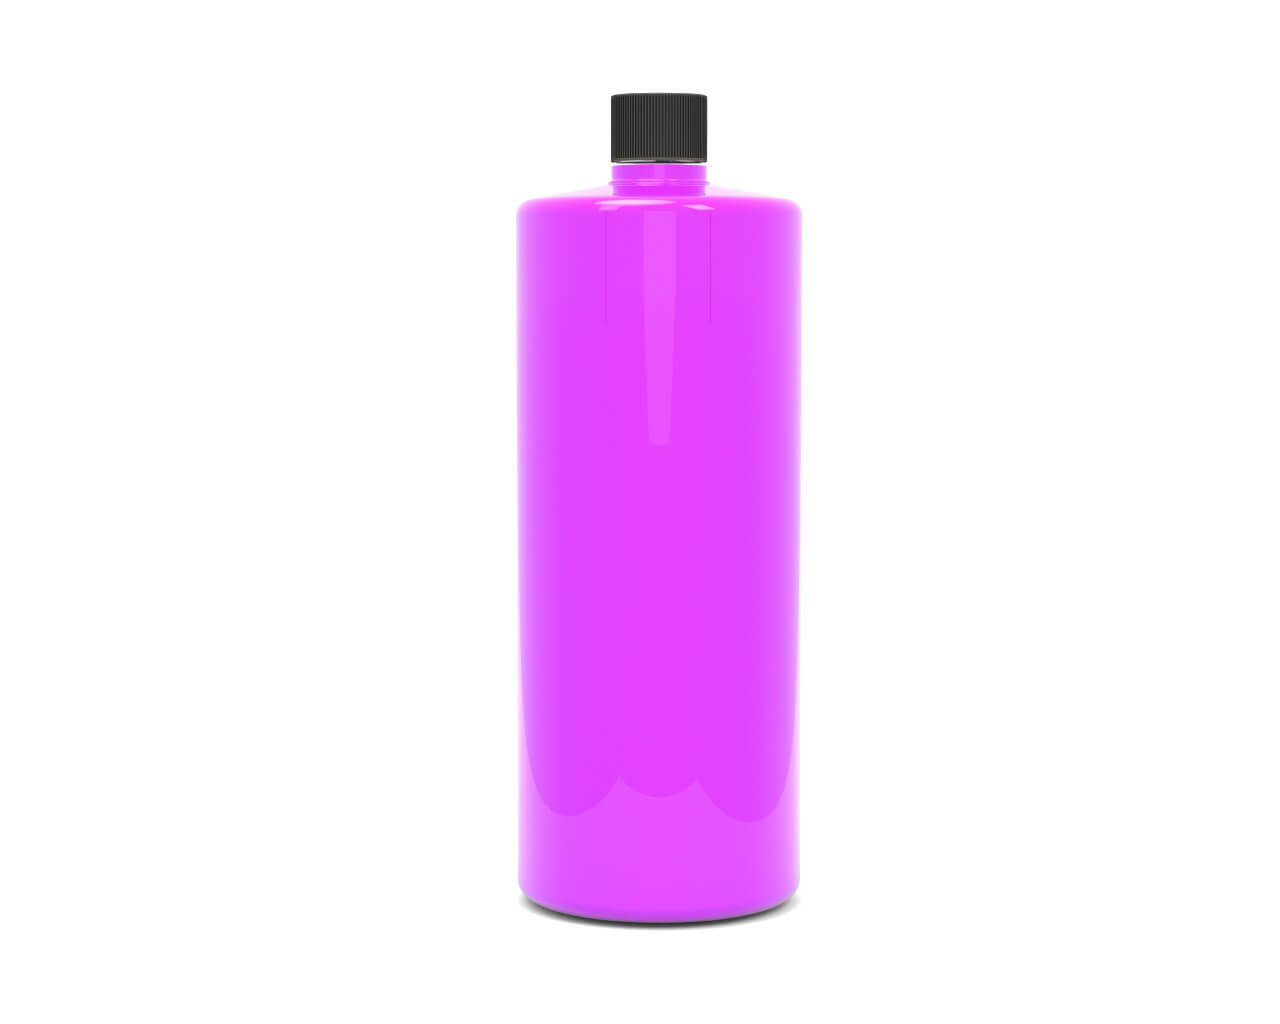 PrimoChill Opaque - Pre-Mix (32oz) - PrimoChill - KEEPING IT COOL Violet